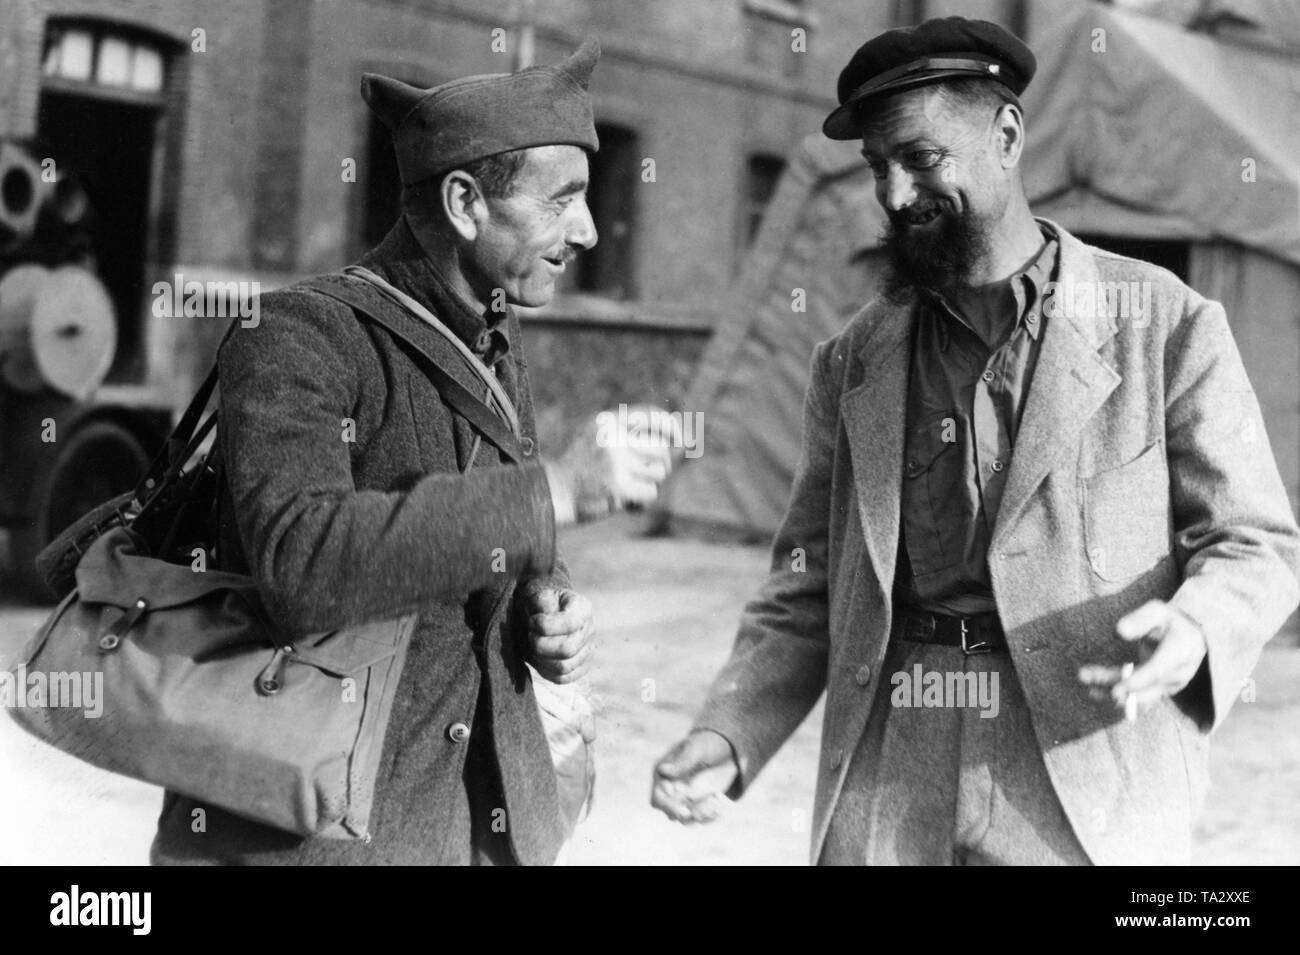 French prisoners of war, who have been released for health reasons from captivity and are now being repatriated, arrive in Chalon-sur-Marne at the Franco-German demarcation lines. Stock Photo